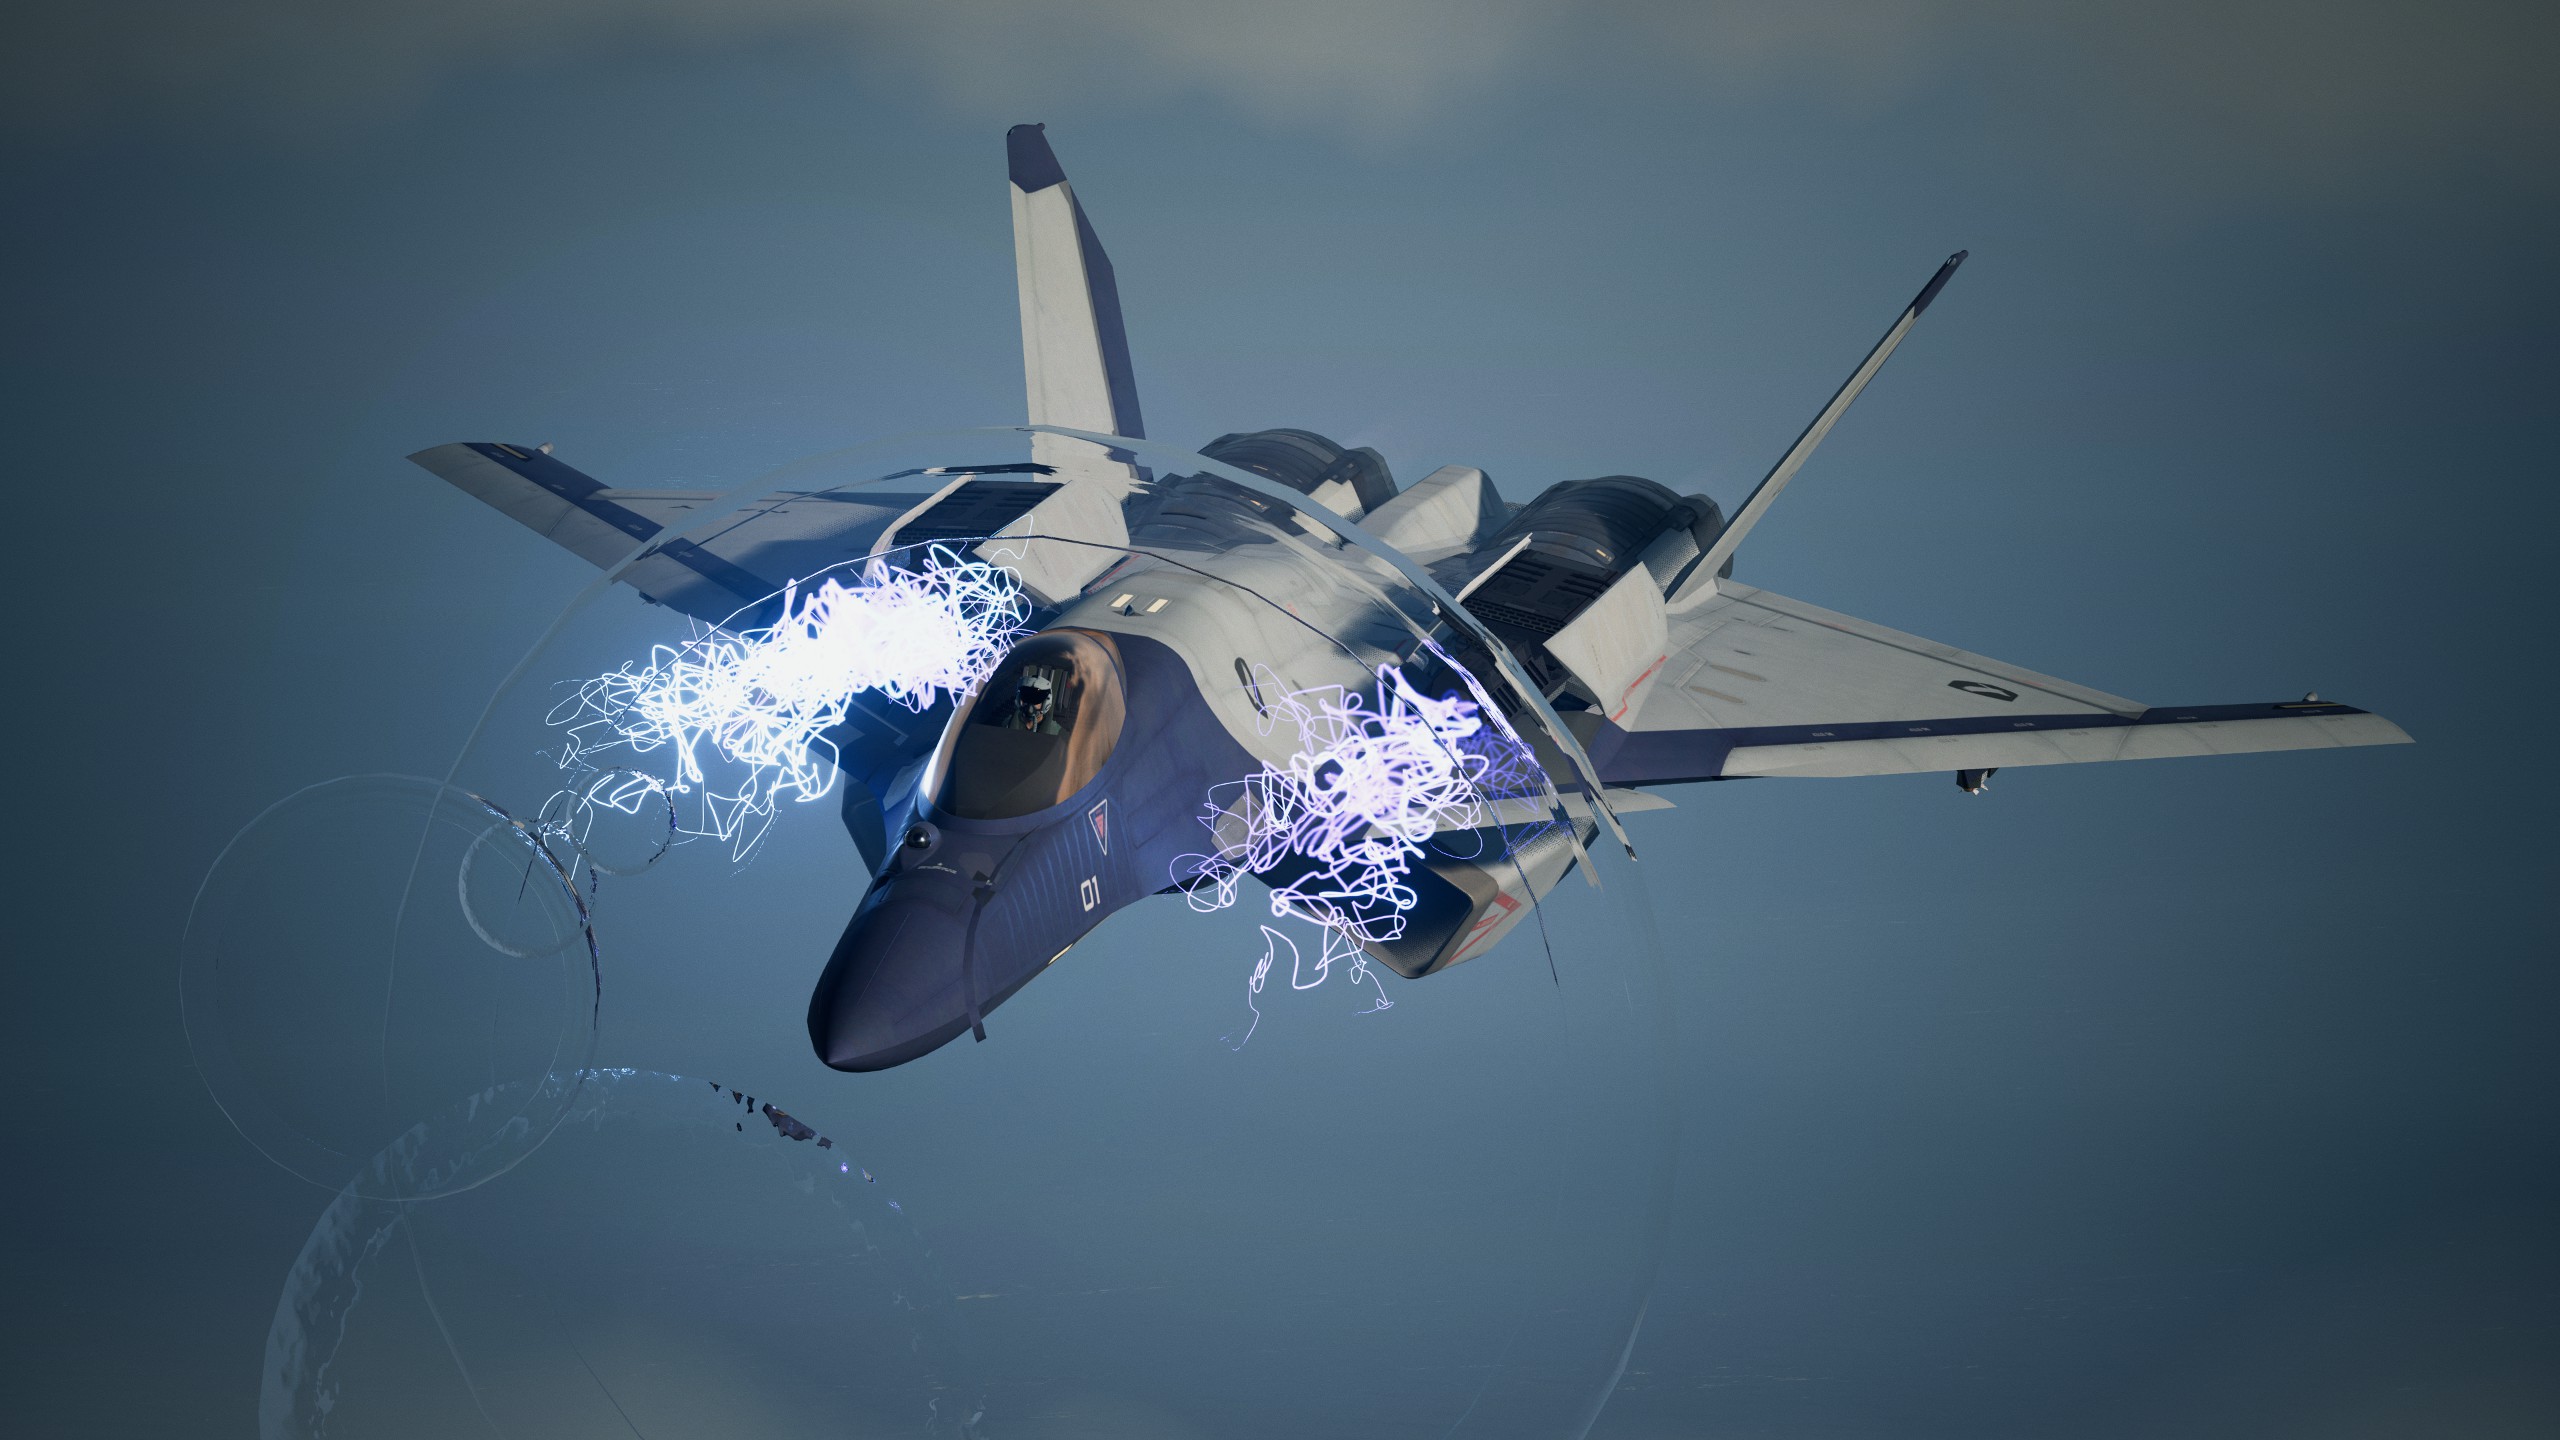 The perfect fighter jet doesn't exi- (Ace Combat 7 mod by TismAero, link  in comments). : r/HalfLife